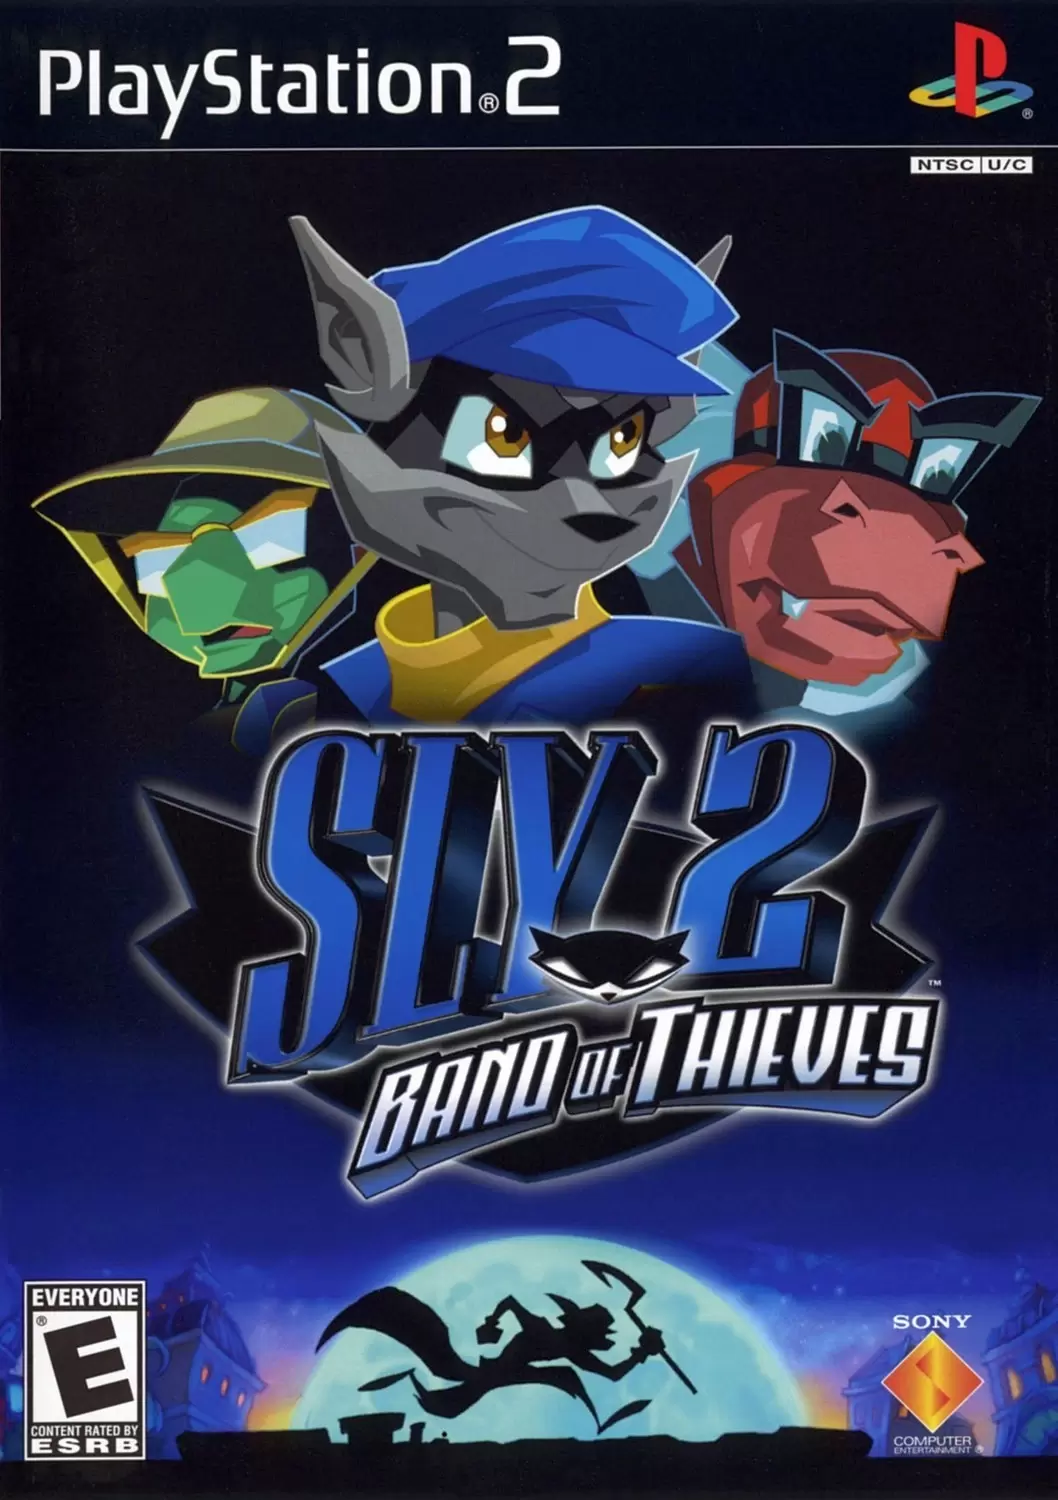 PS2 Games - Sly 2: Band of Thieves